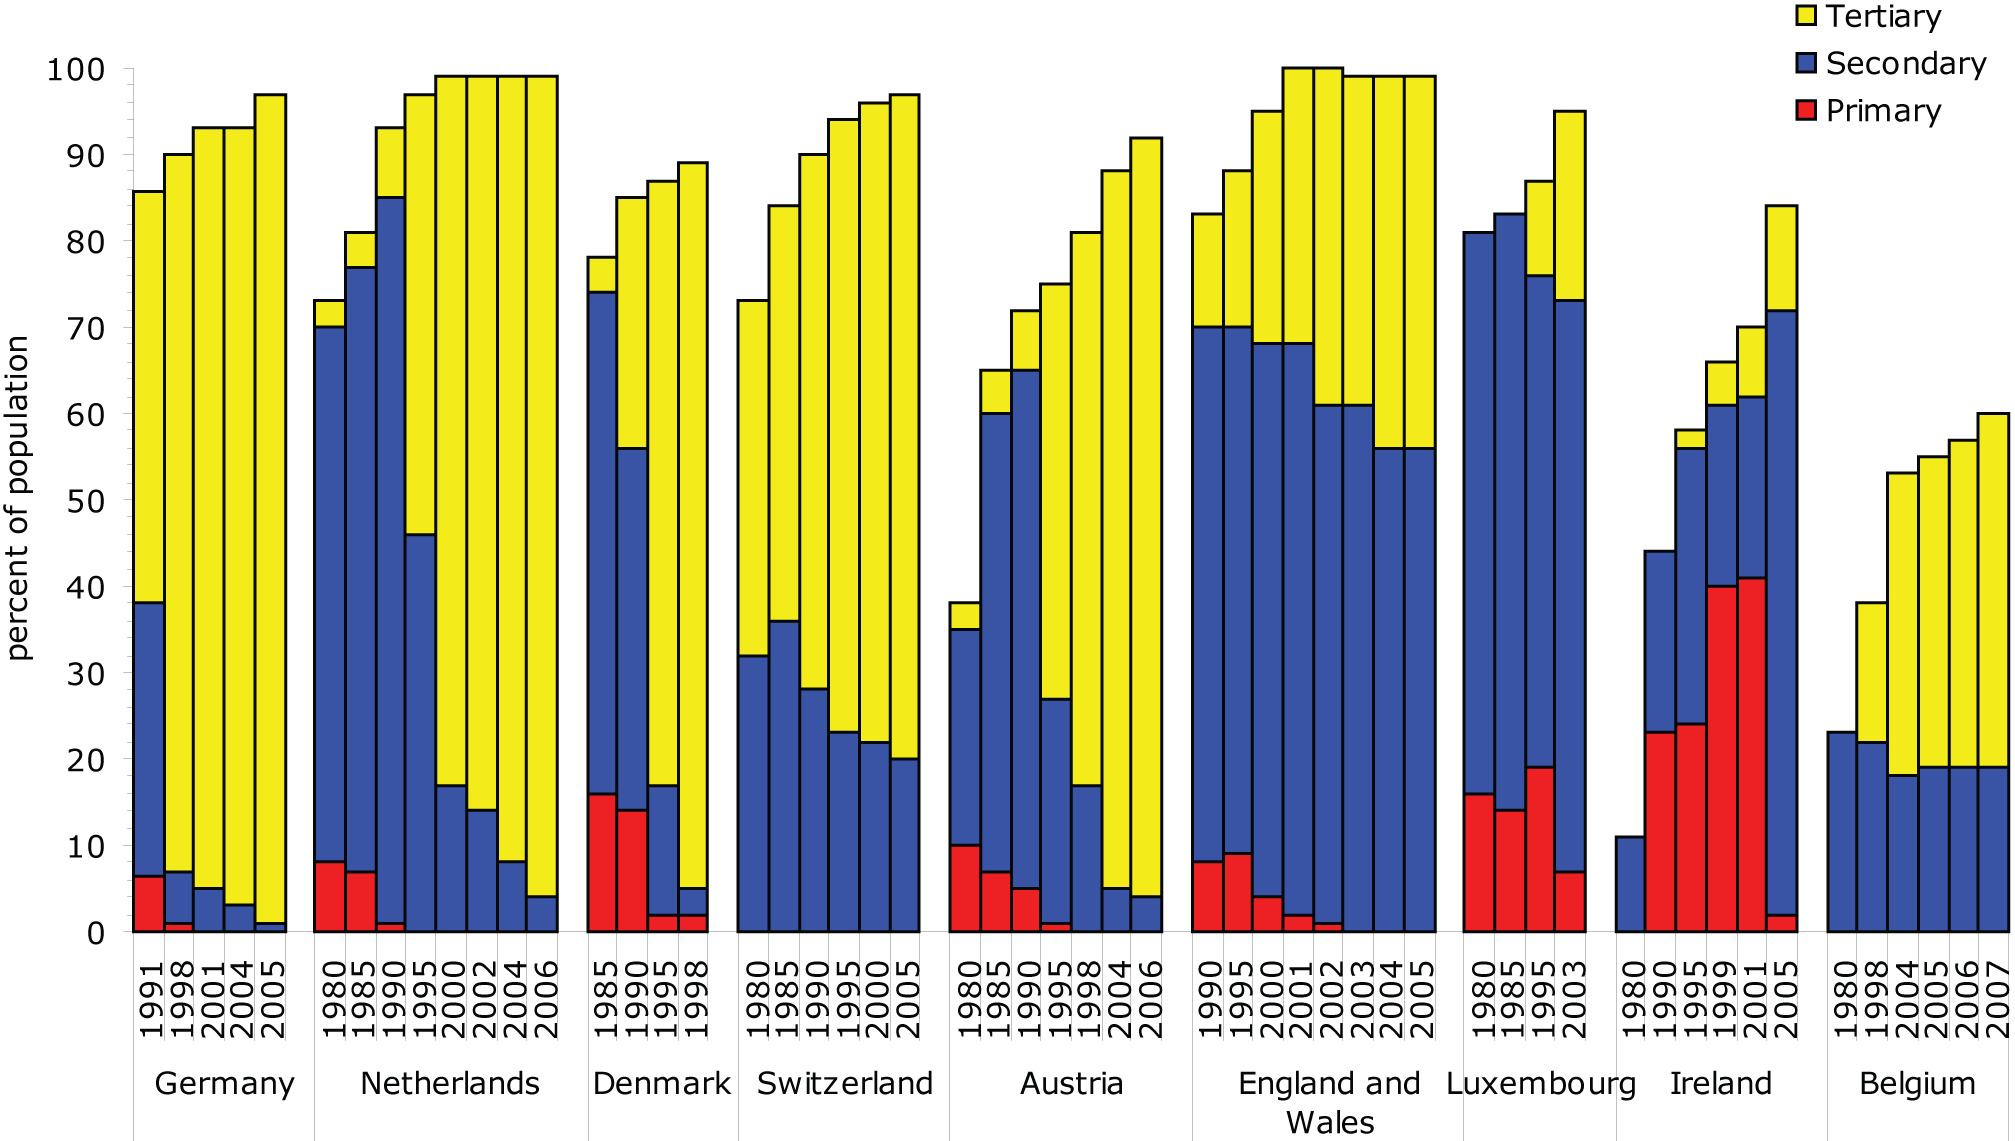 Changes in wastewater treatment in Western European countries between 1980s and 2007 